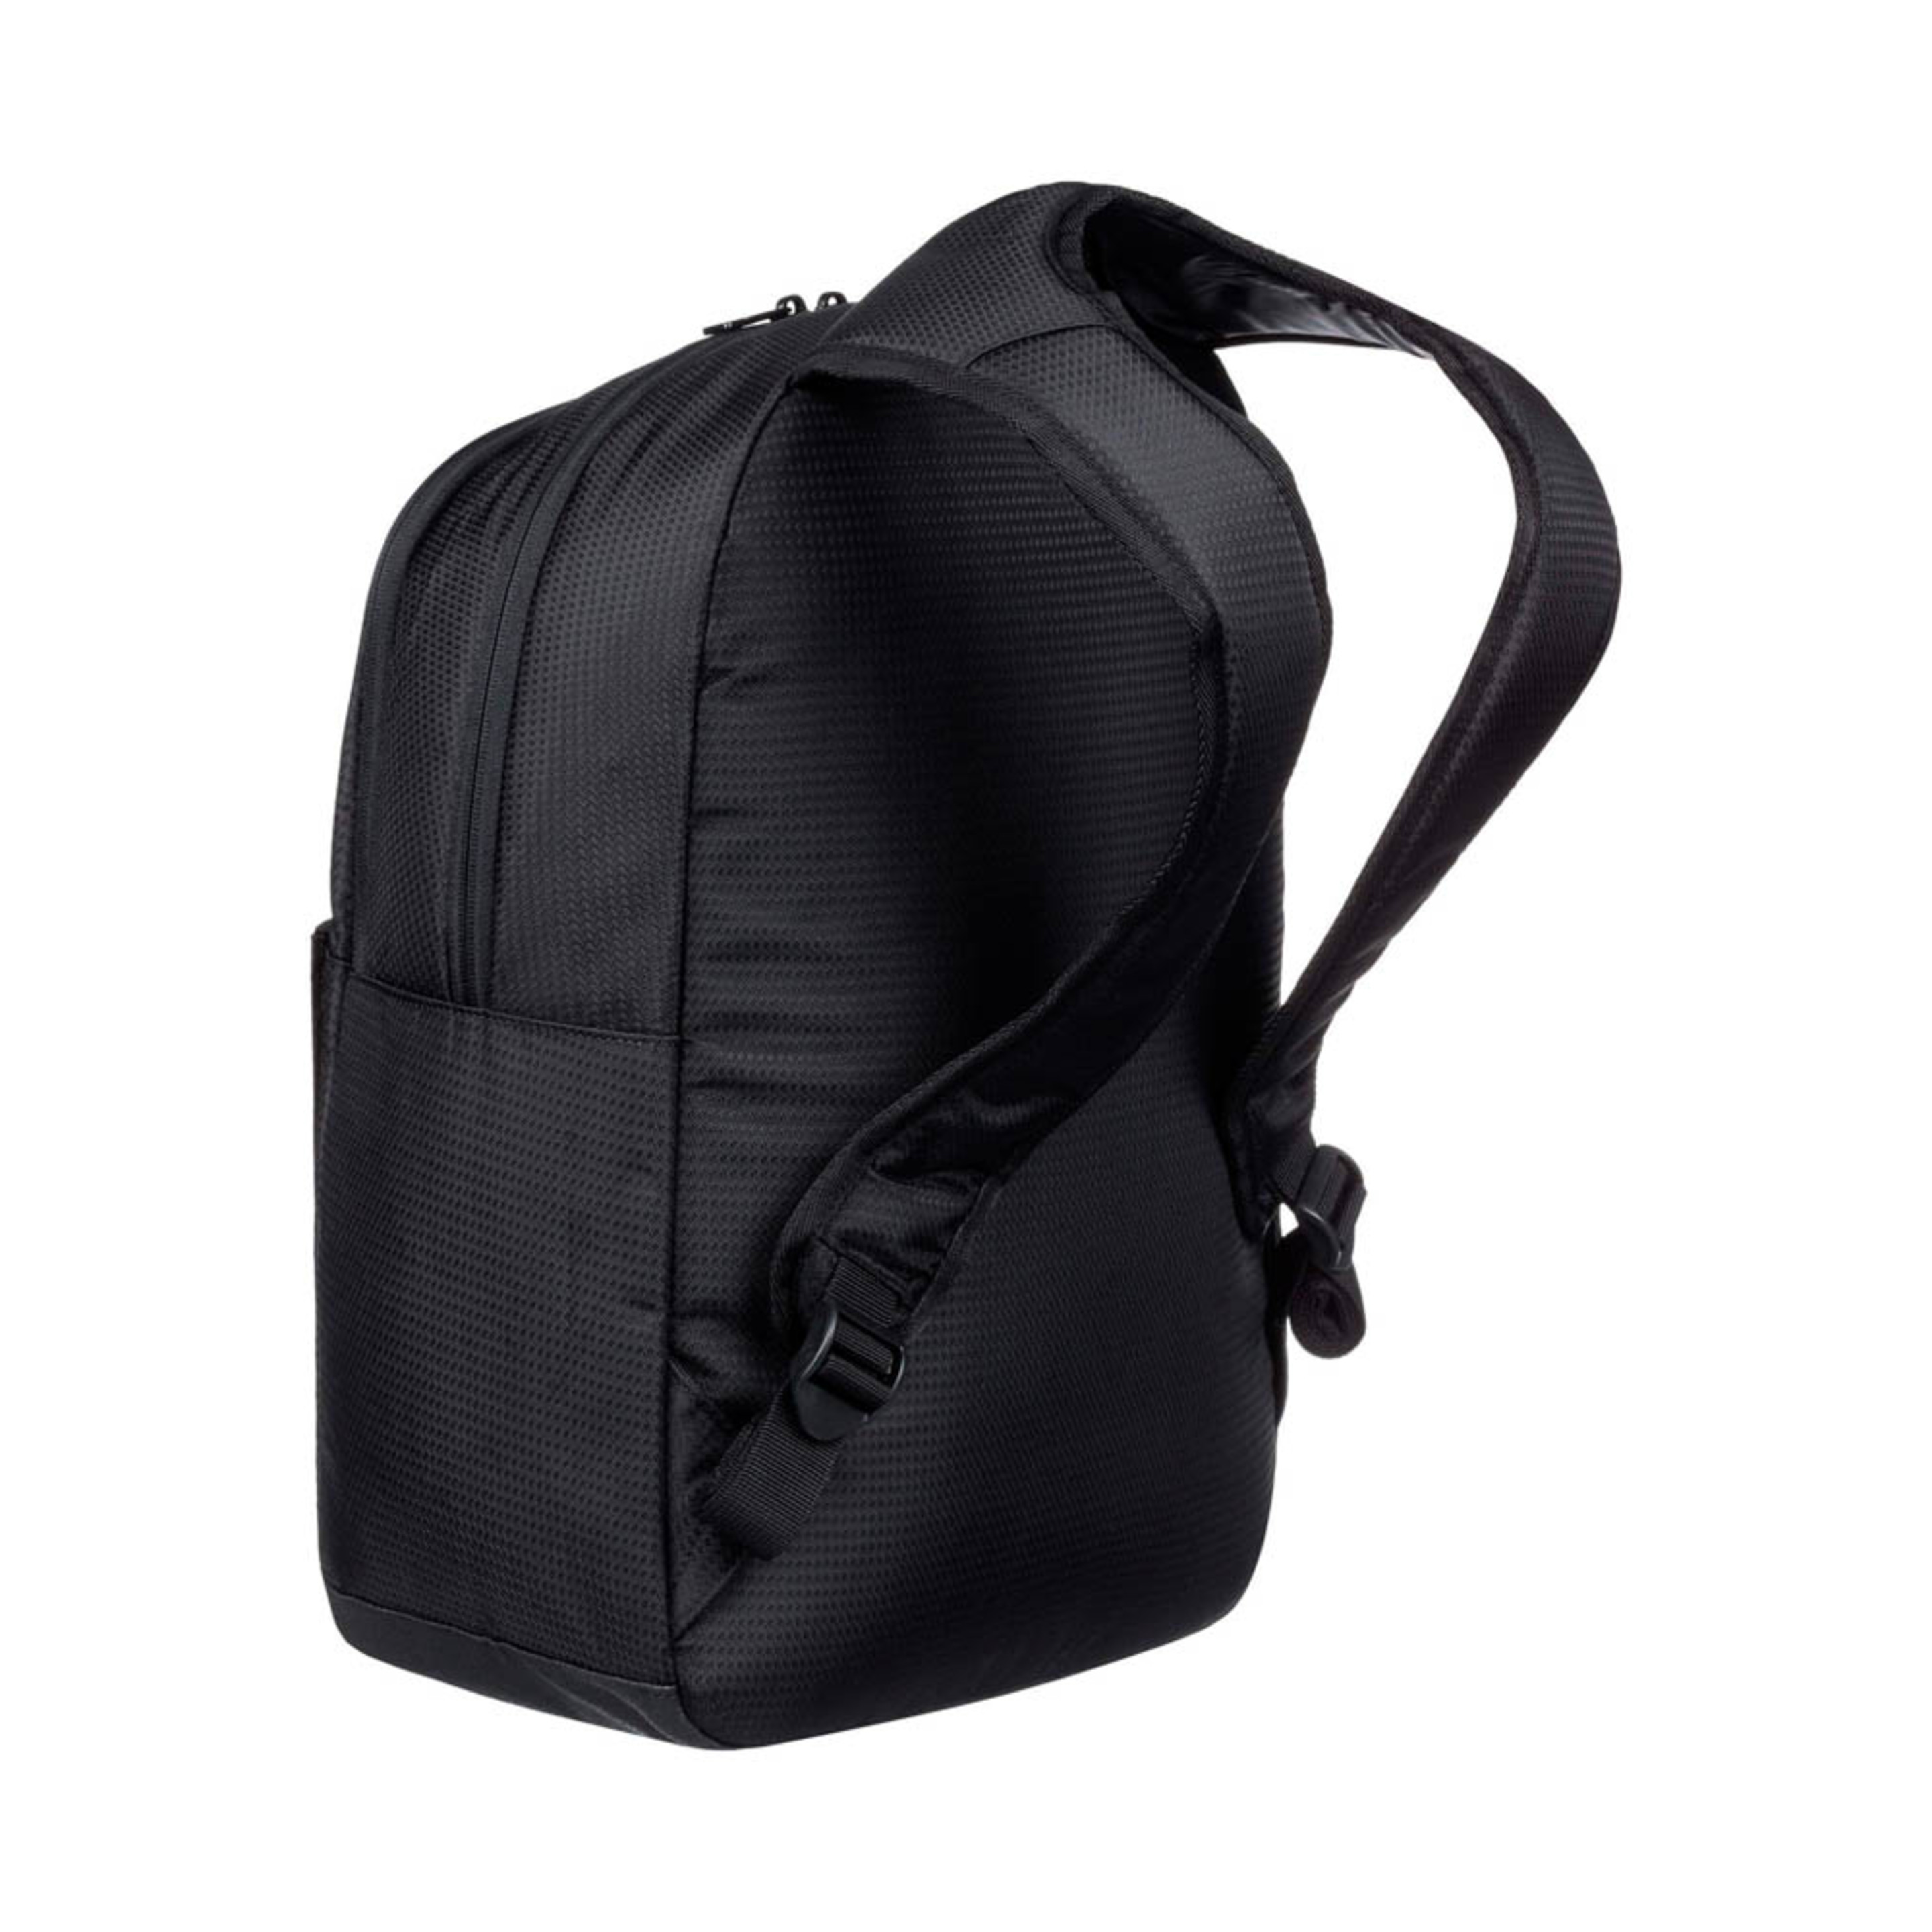 Mochila Roxy Here You Are Textured Anthracite